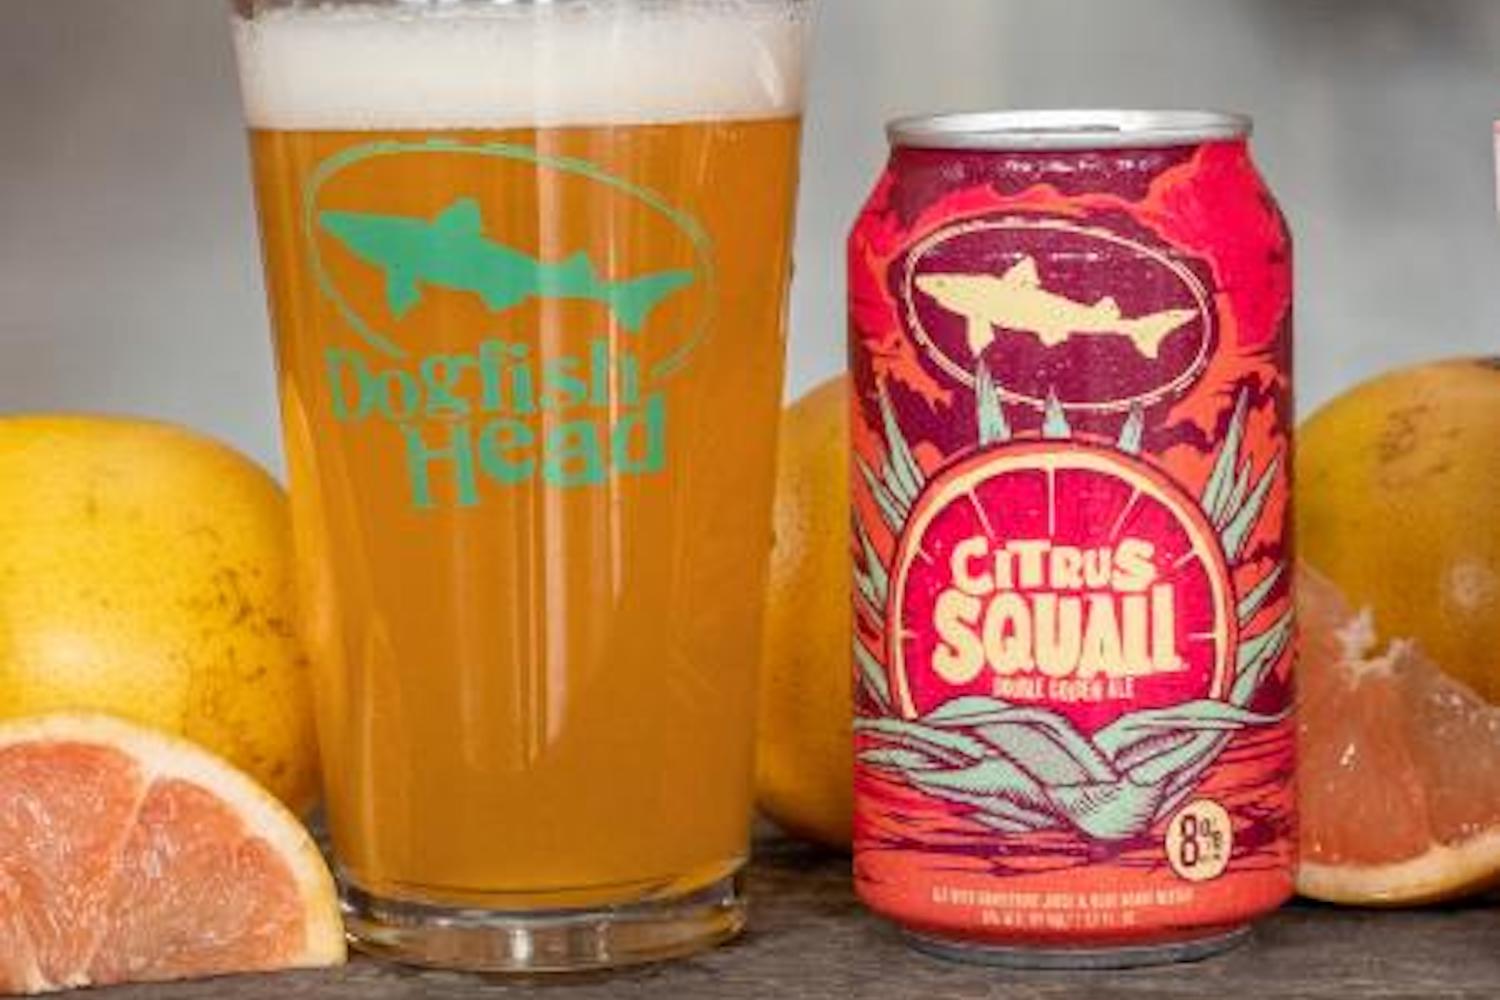 a can and poured glass of the Dogfish HEad Citrus Squall